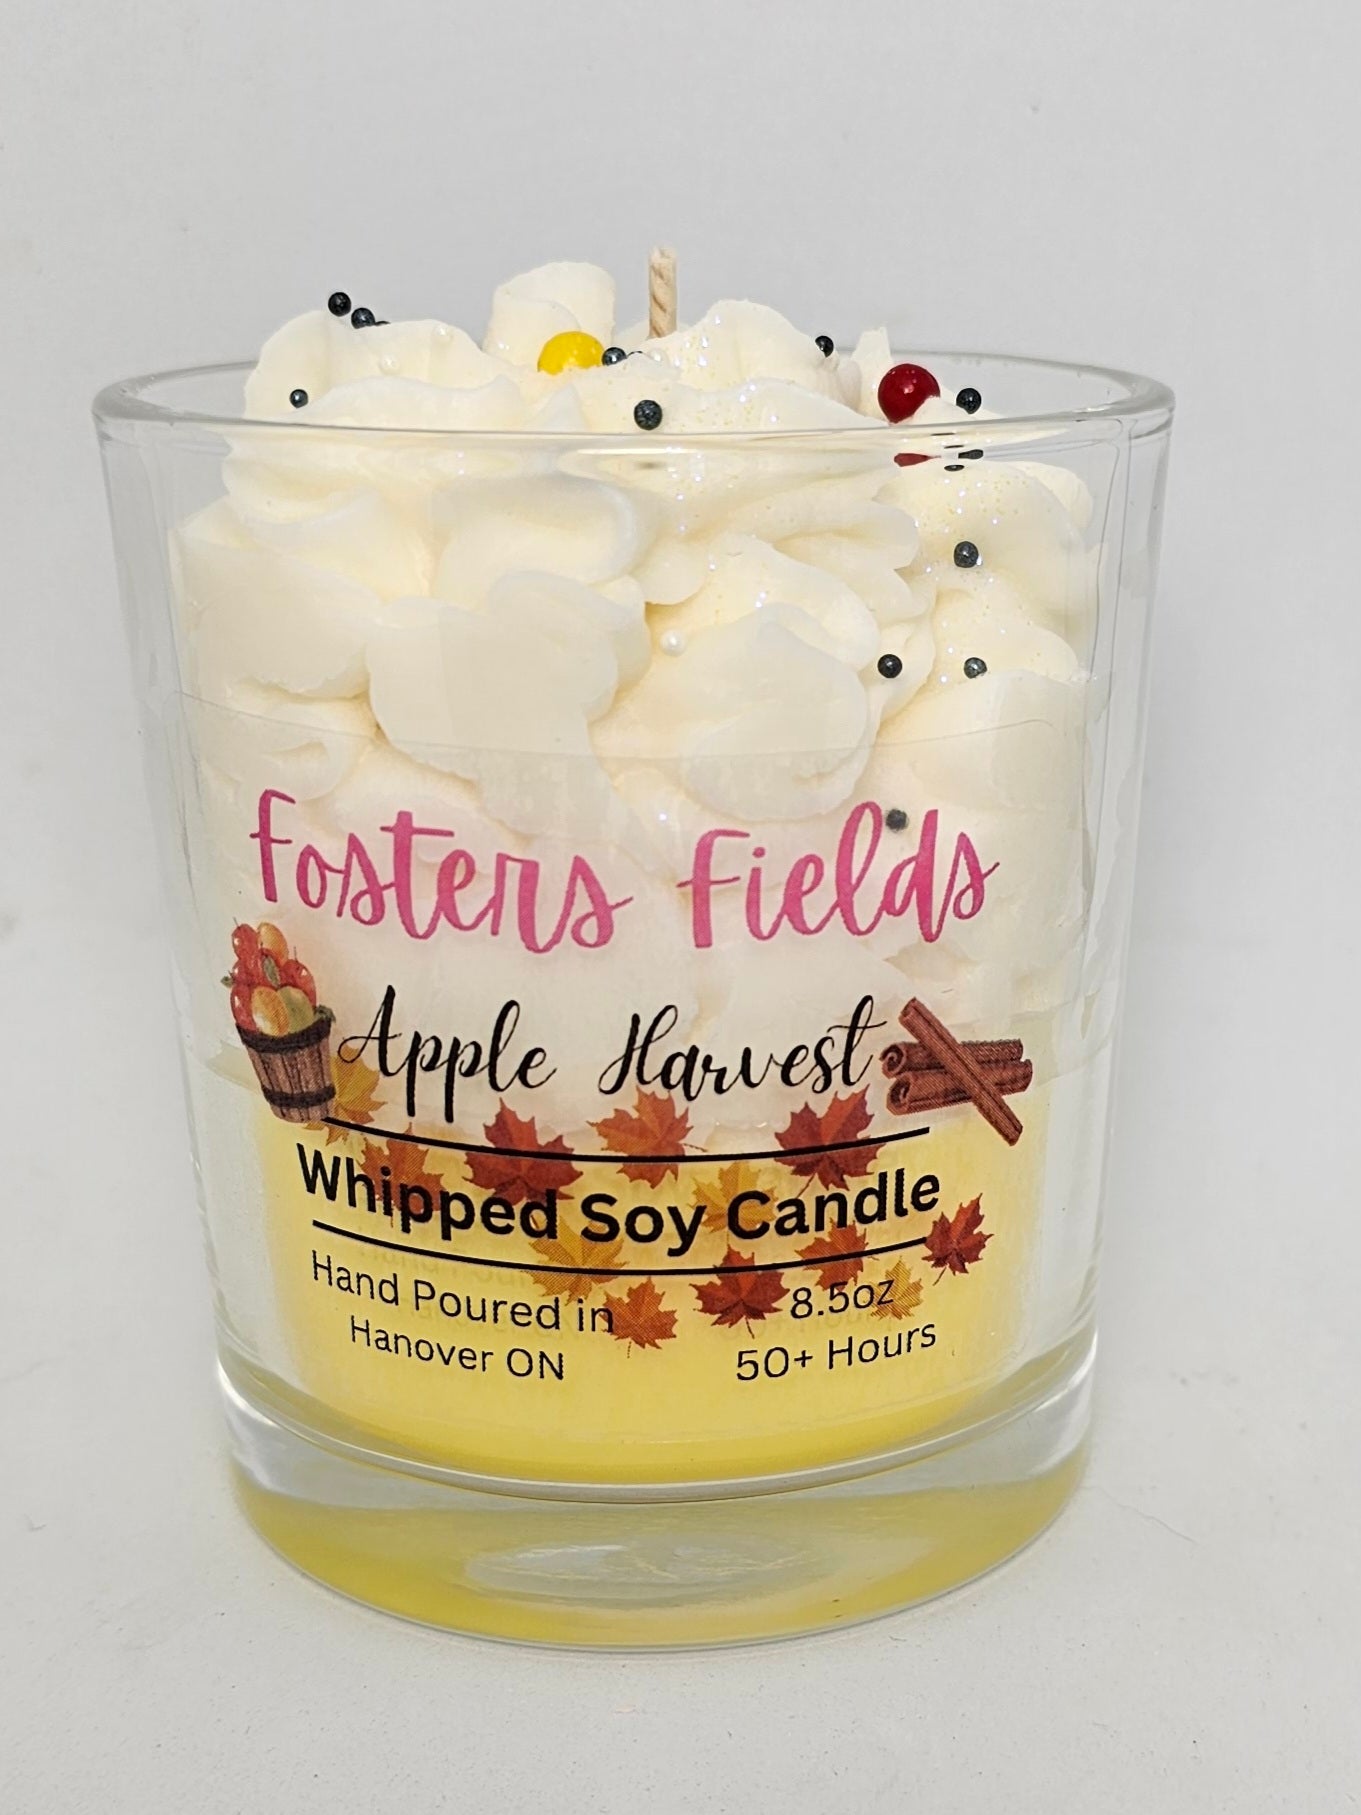 Apple Harvest Soy Candle - FostersFields